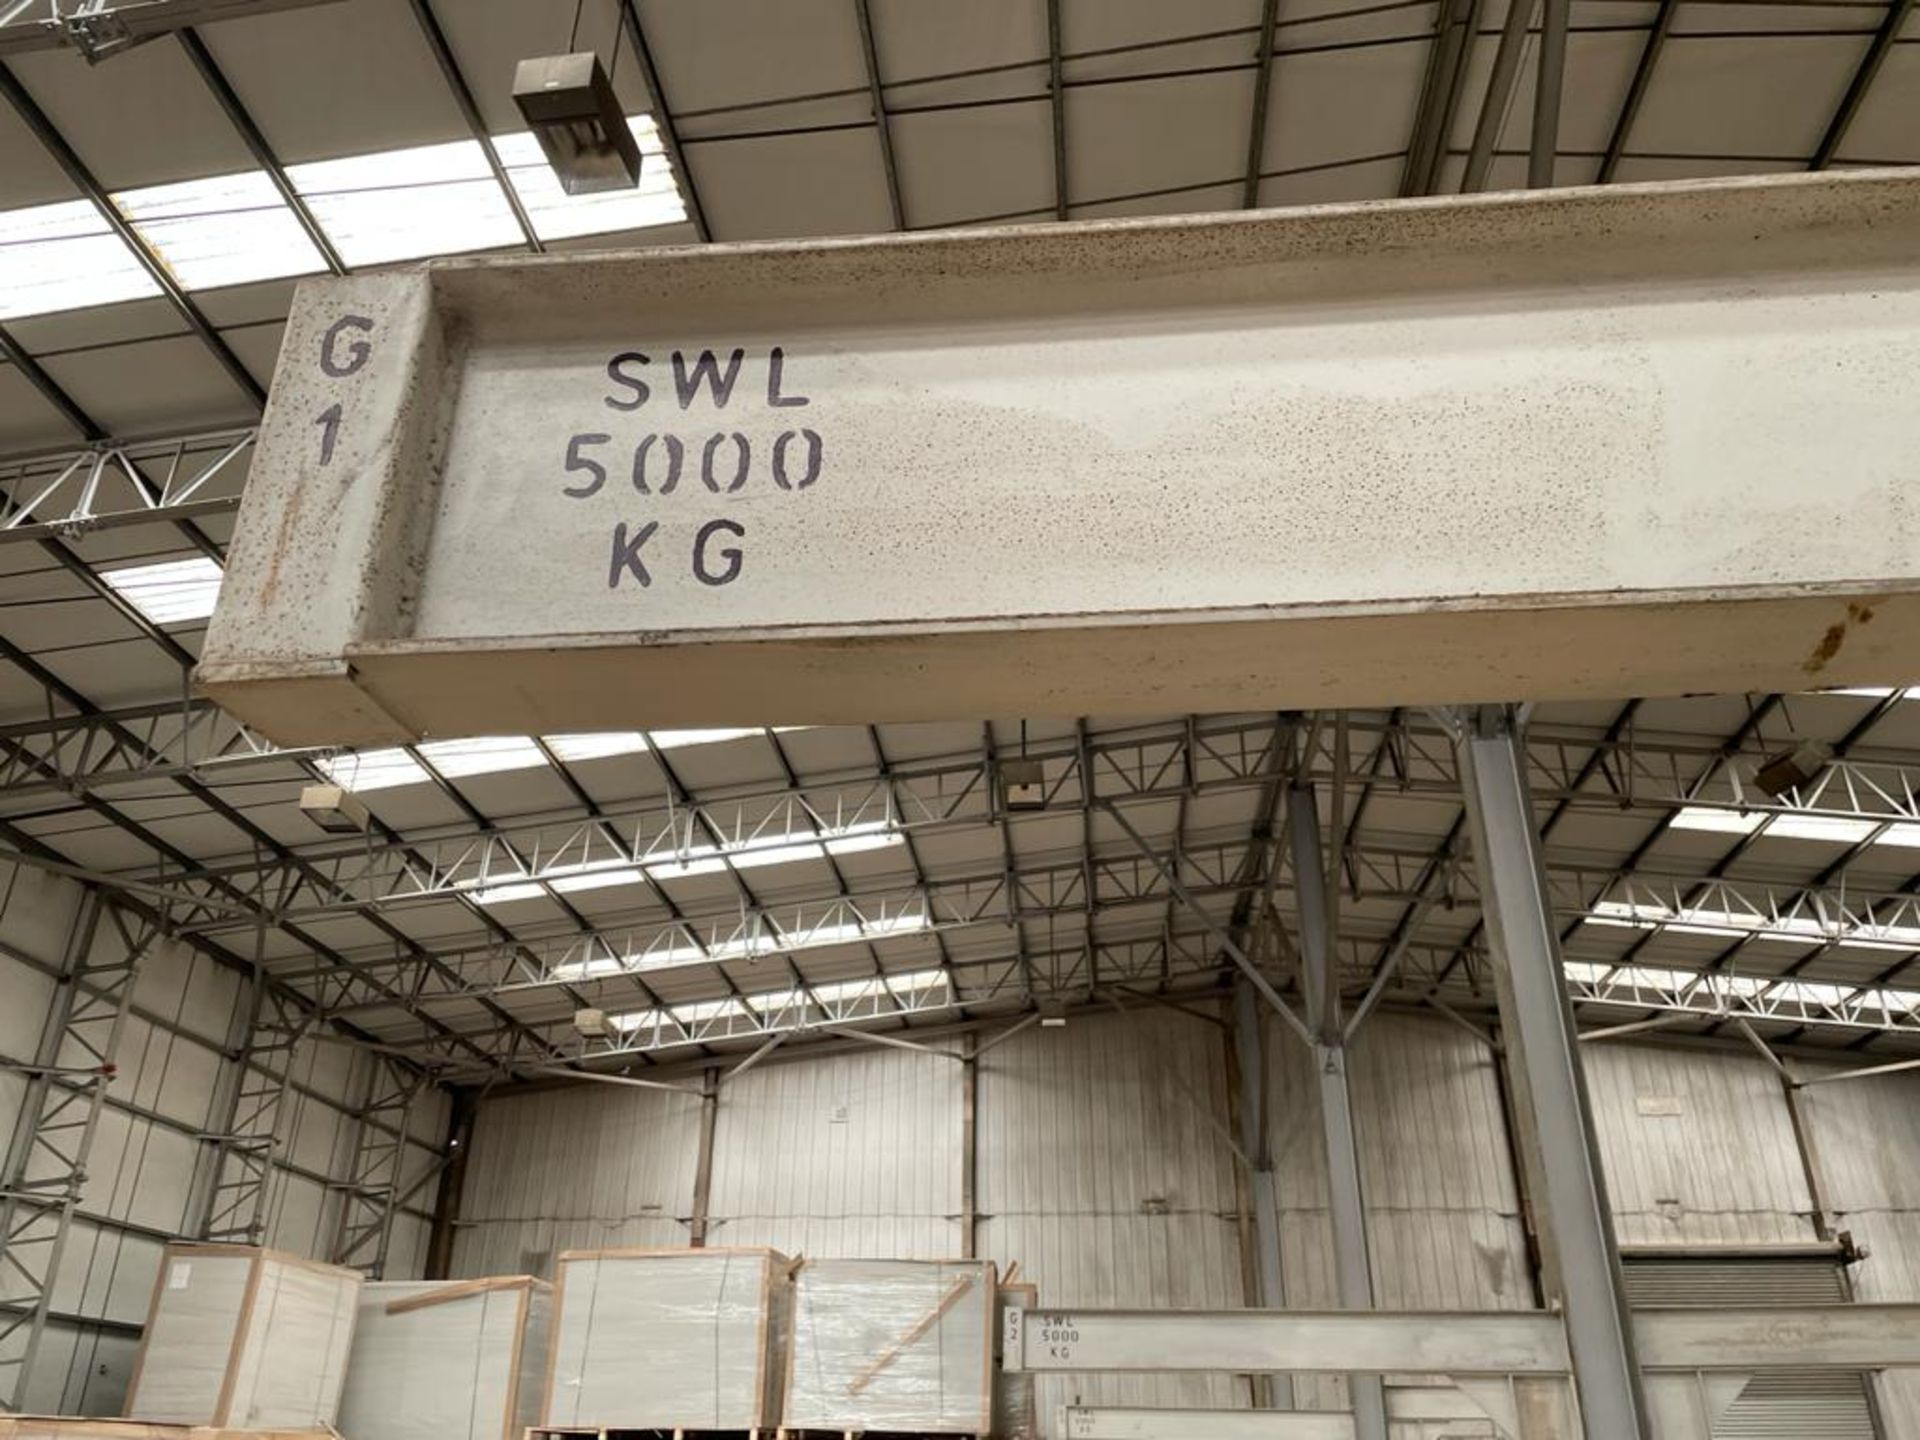 8 x Heavy Duty Cantilever Racking Uprights - SWL 5000kg - Ideal For Builders Merchants or Warehouses - Image 2 of 8